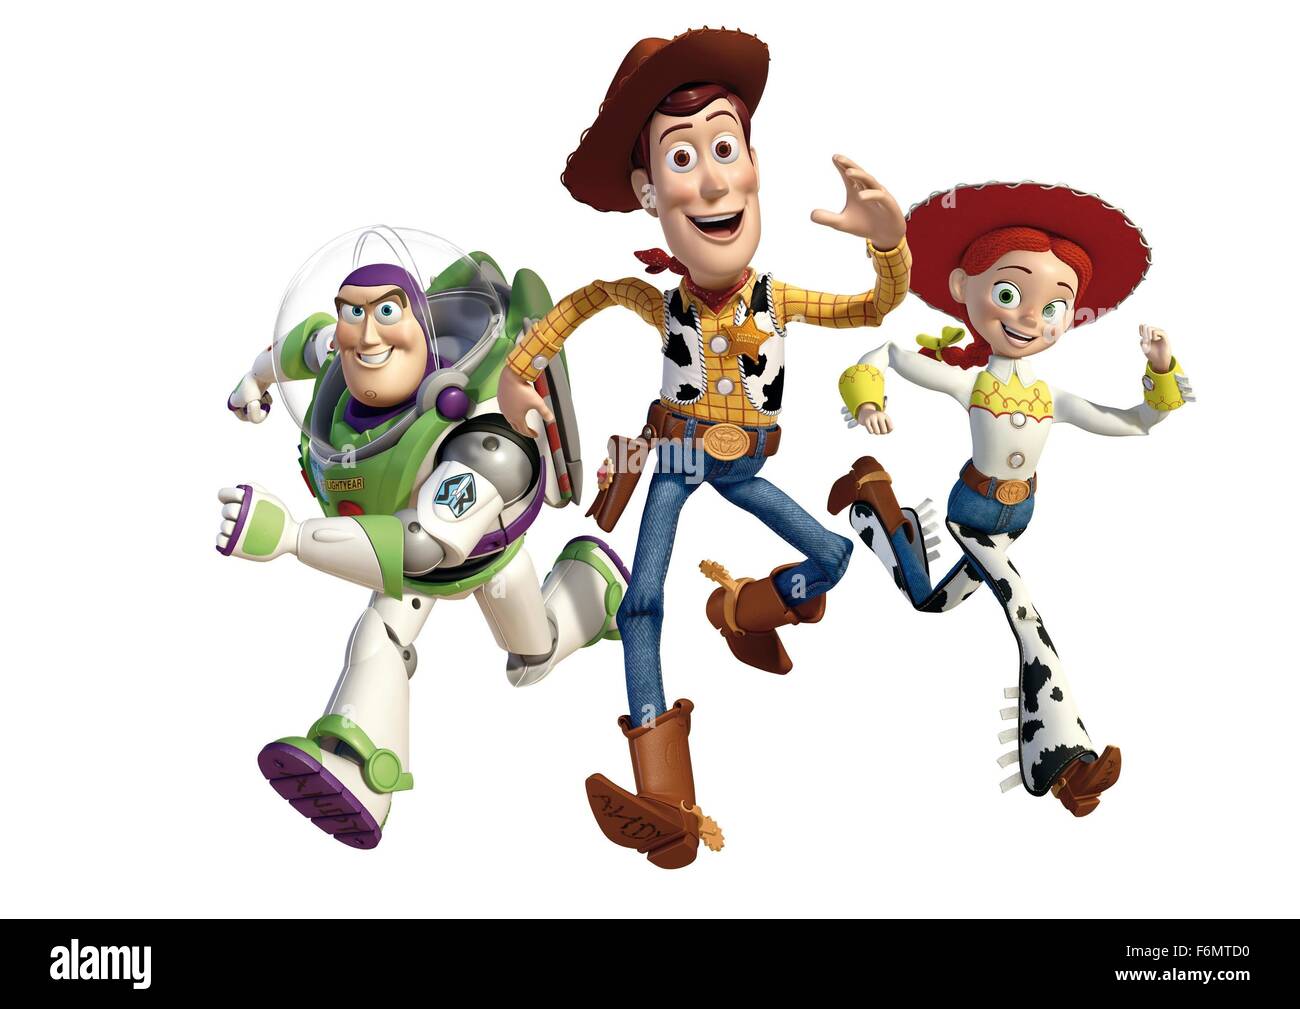 RELEASE DATE: June 18, 2010   MOVIE TITLE: Toy Story 3   STUDIO: Disney Pixar   DIRECTOR: Lee Unkrich   PLOT: Woody, Buzz, and the rest of their toy-box friends are dumped in a day-care center after their owner, Andy, departs for college   PICTURED: Buzz Lightyear with Woody and Jessie   (Credit Image: c Disney Pixar/Entertainment Pictures) Stock Photo